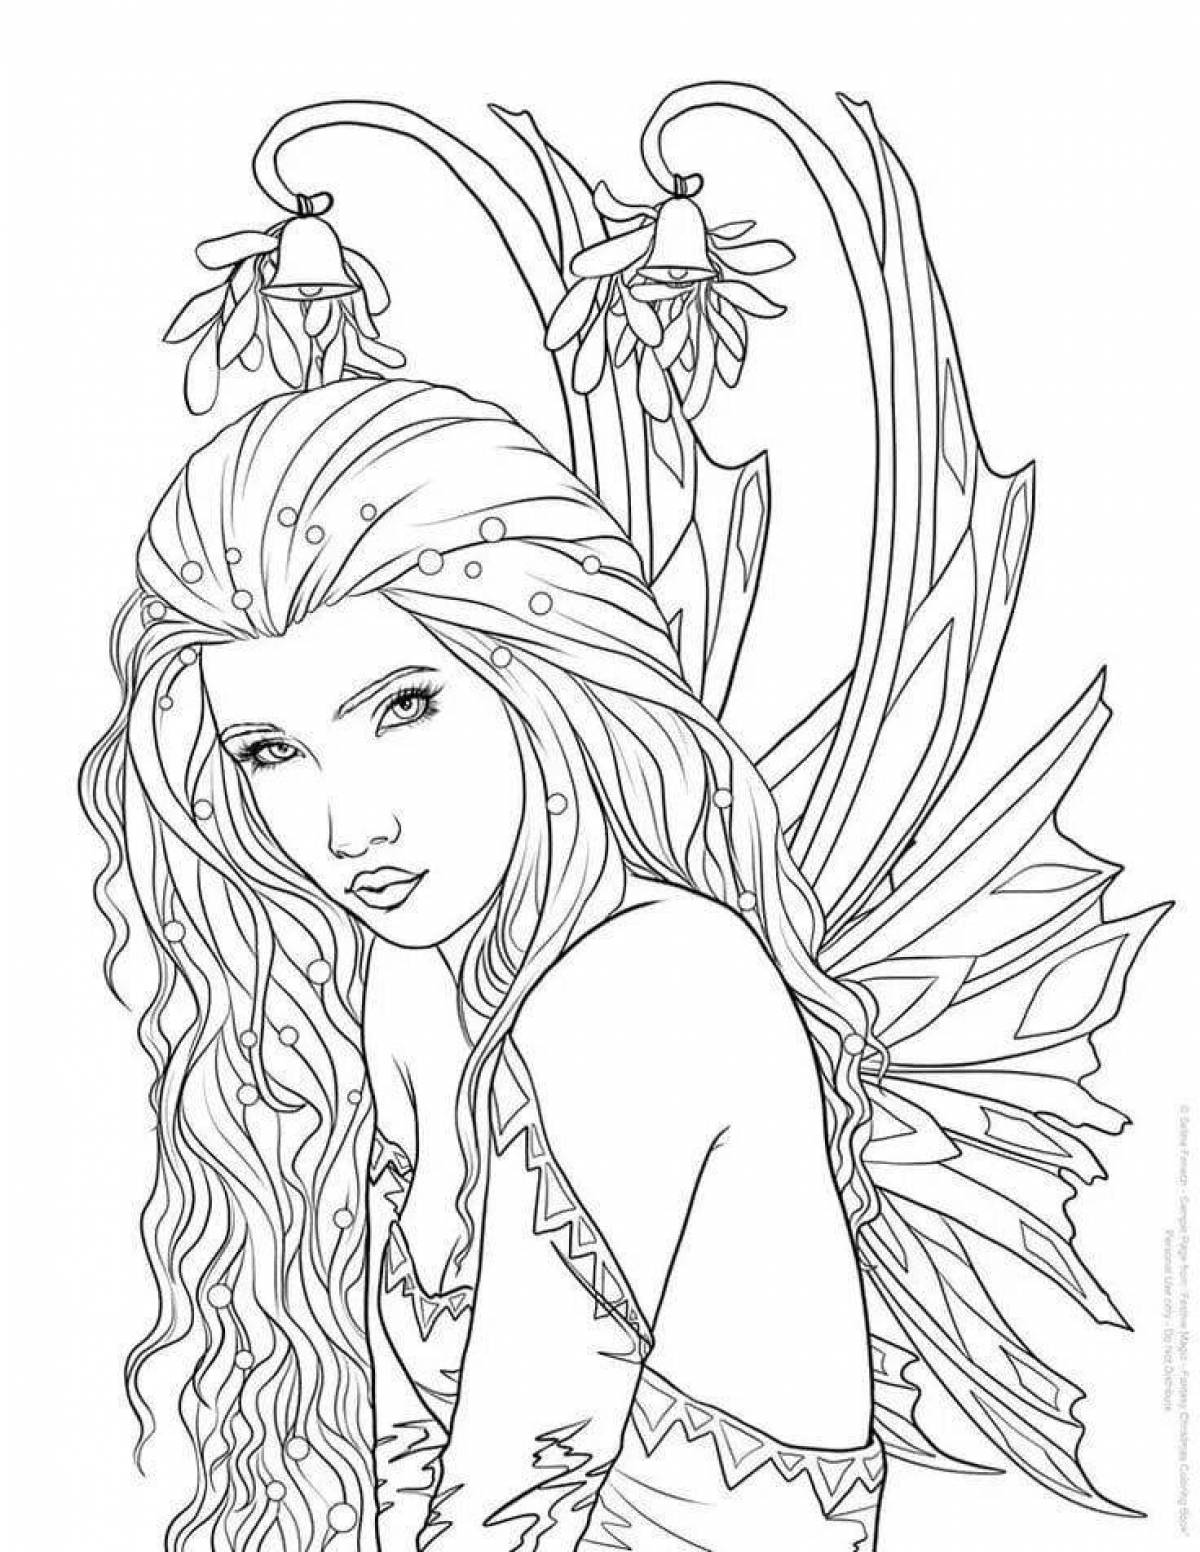 Exalted coloring pages for girls beautiful girls